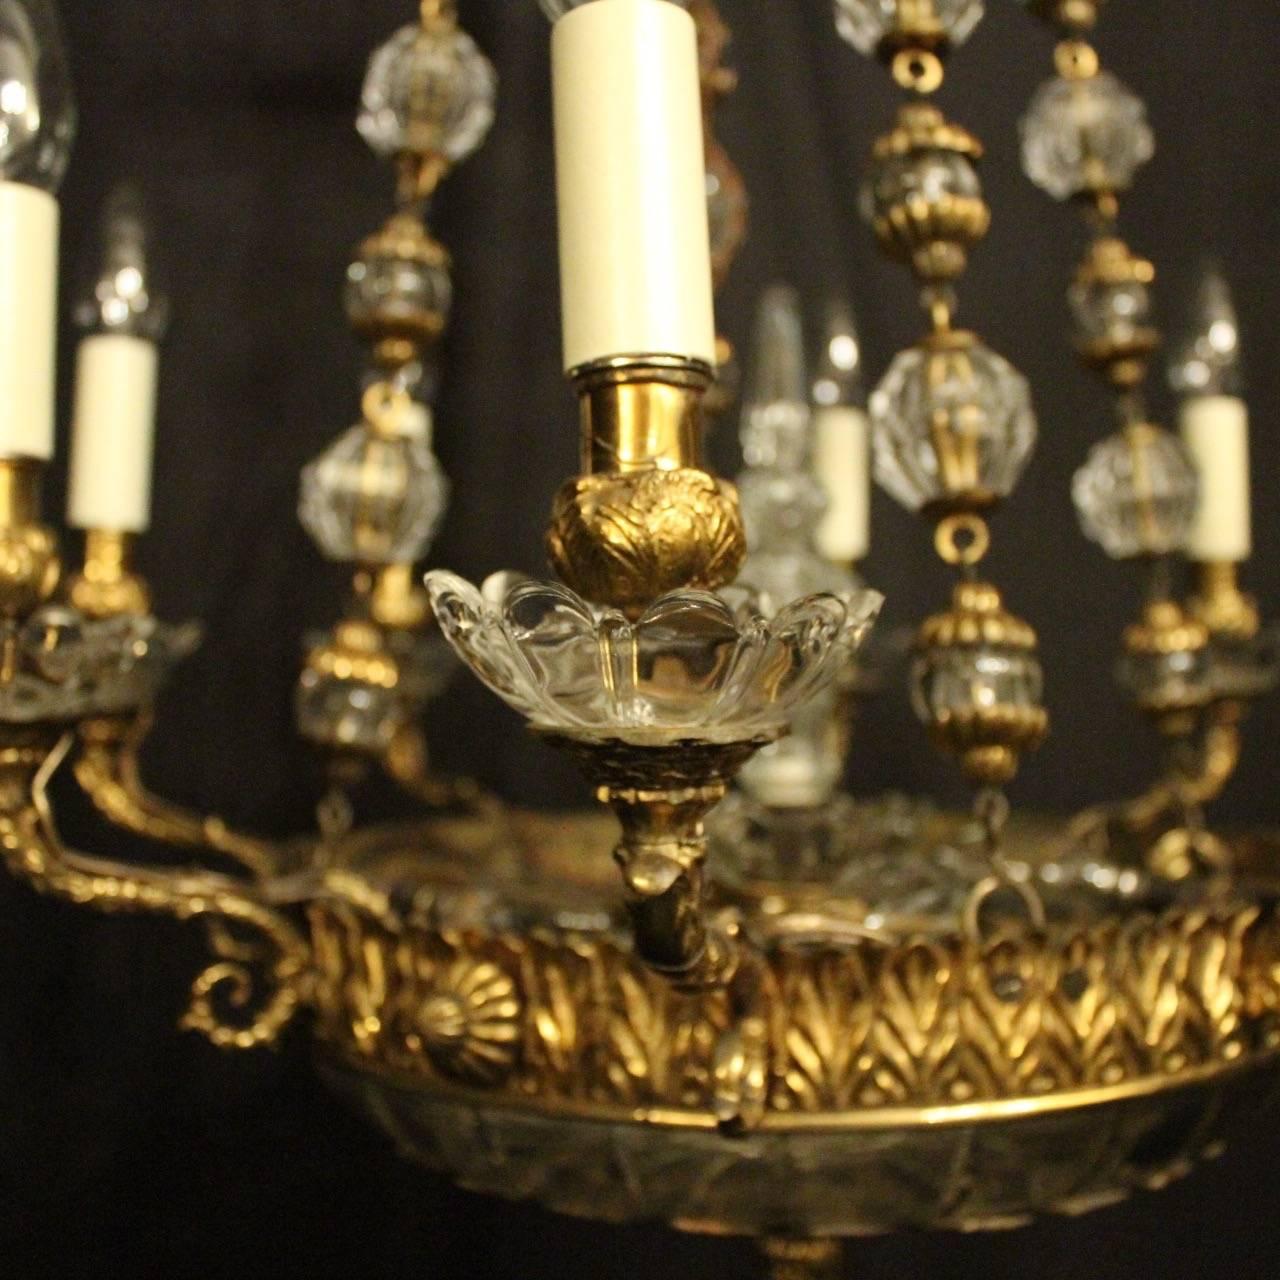 A lovely French gilded bronze 10 light antique chandelier, the 6 ornate leaf scrolling arms with foliated glass bobeche drip pans and bulbous candle sconces, issuing from a decorative leaf clad circular band with 4 internal light fittings, crystal